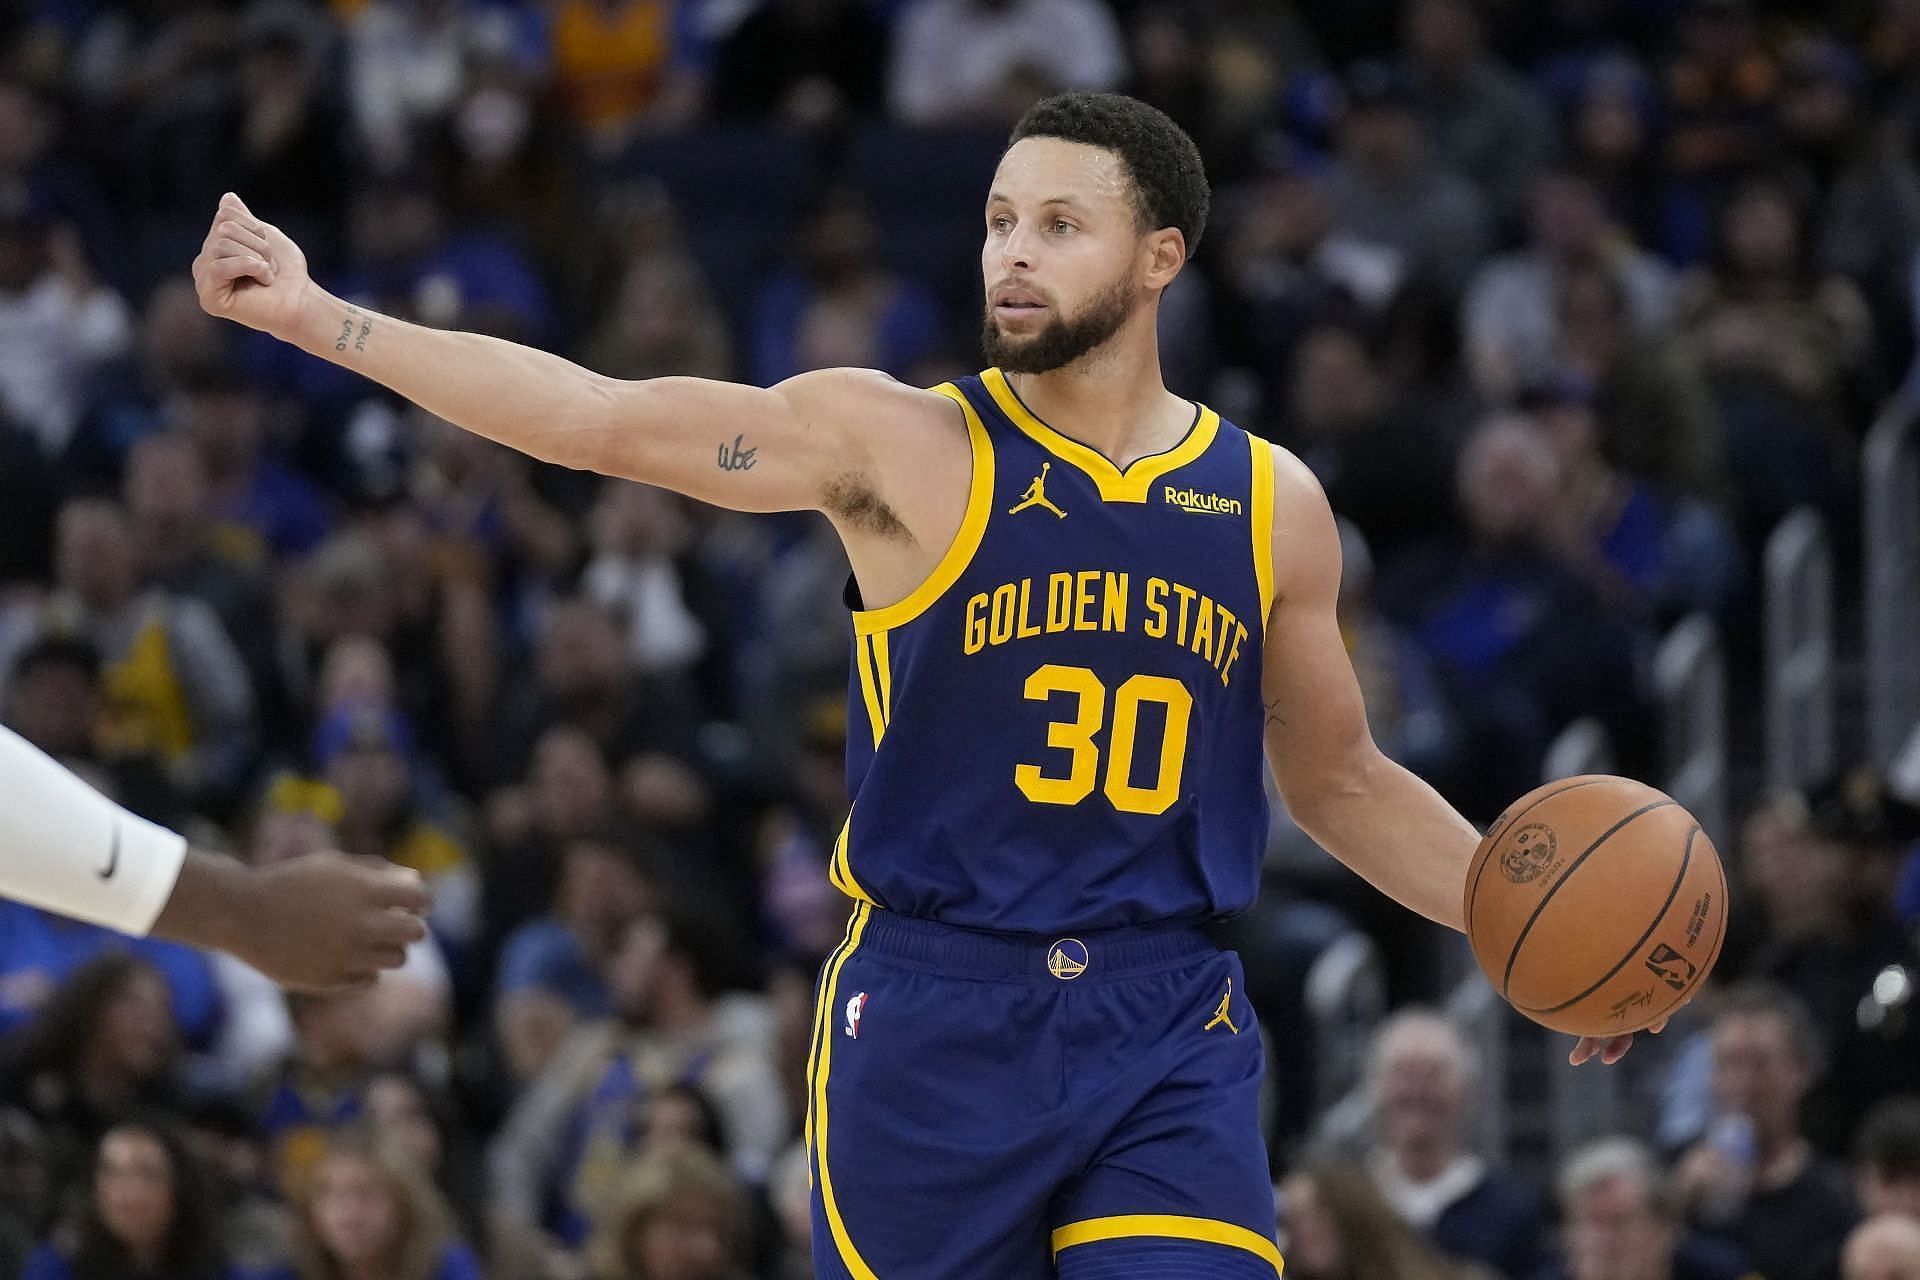 Golden State Warriors Injury Report (Nov 22): Latest update on Steph Curry